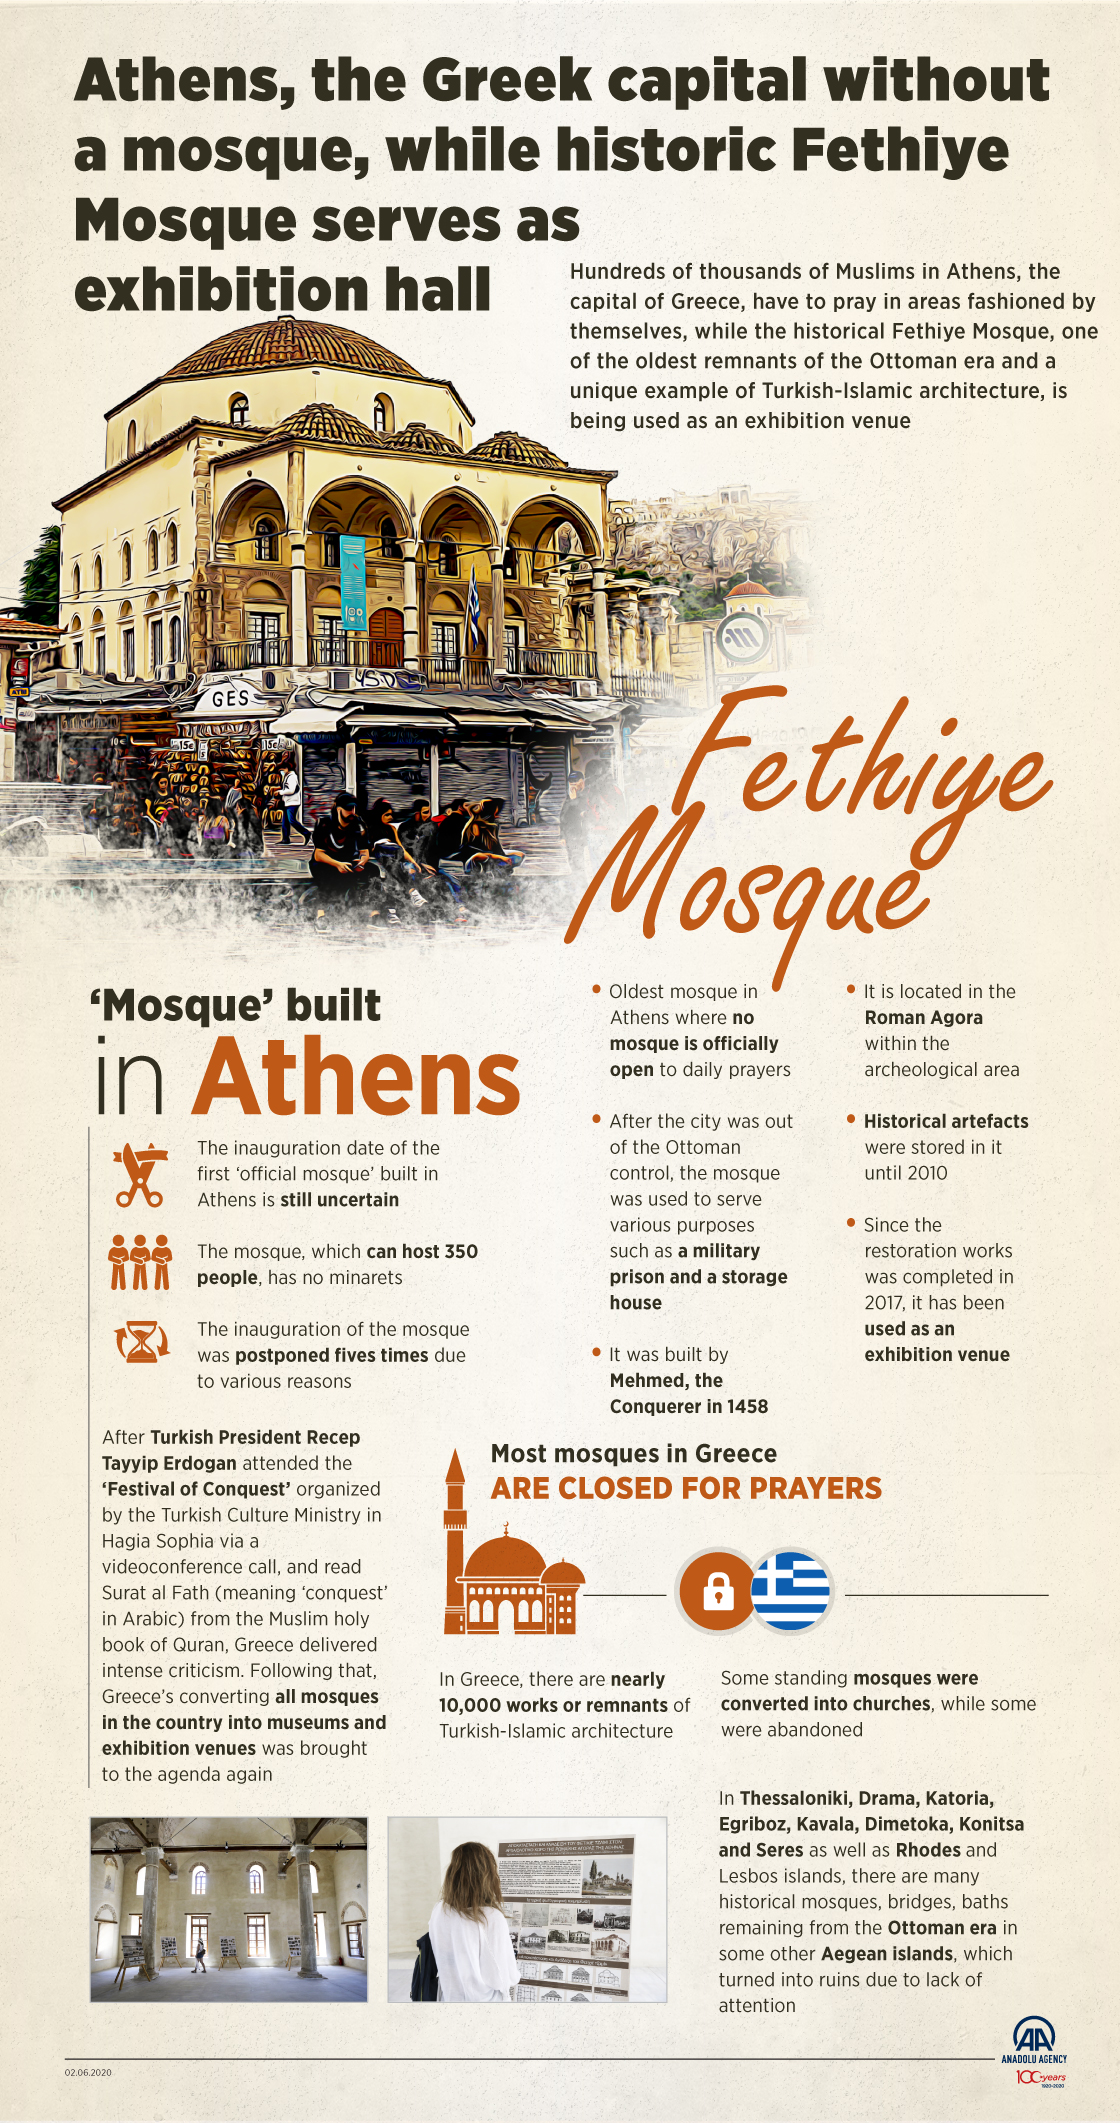 Athens, the Greek capital without a mosque, while historic Fethiye Mosque serves as exhibition hall